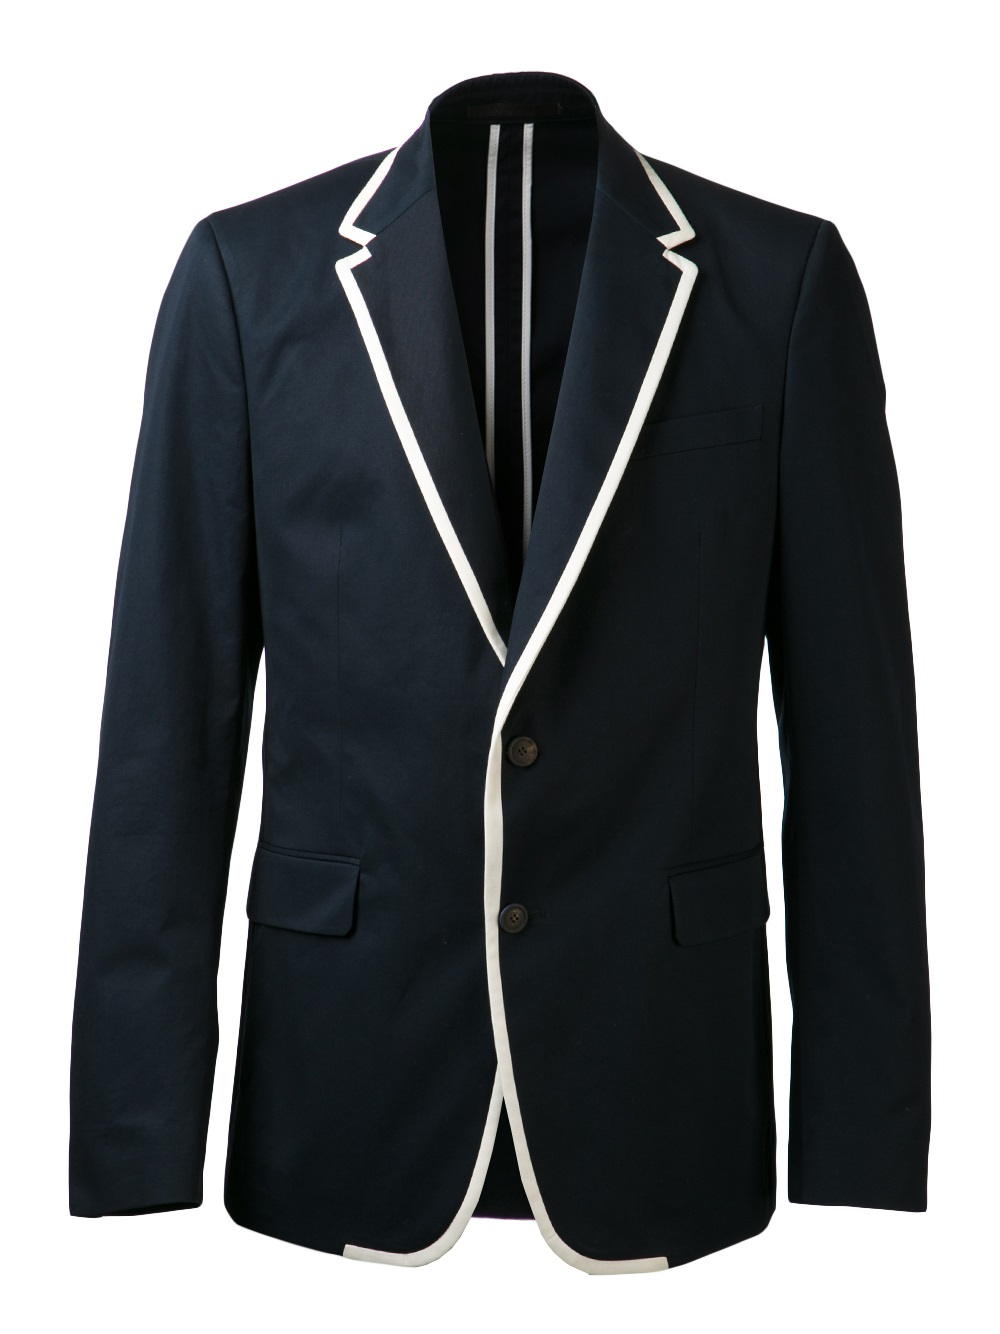 Valentino Contrast Piped Trim Jacket in Blue for Men - Lyst